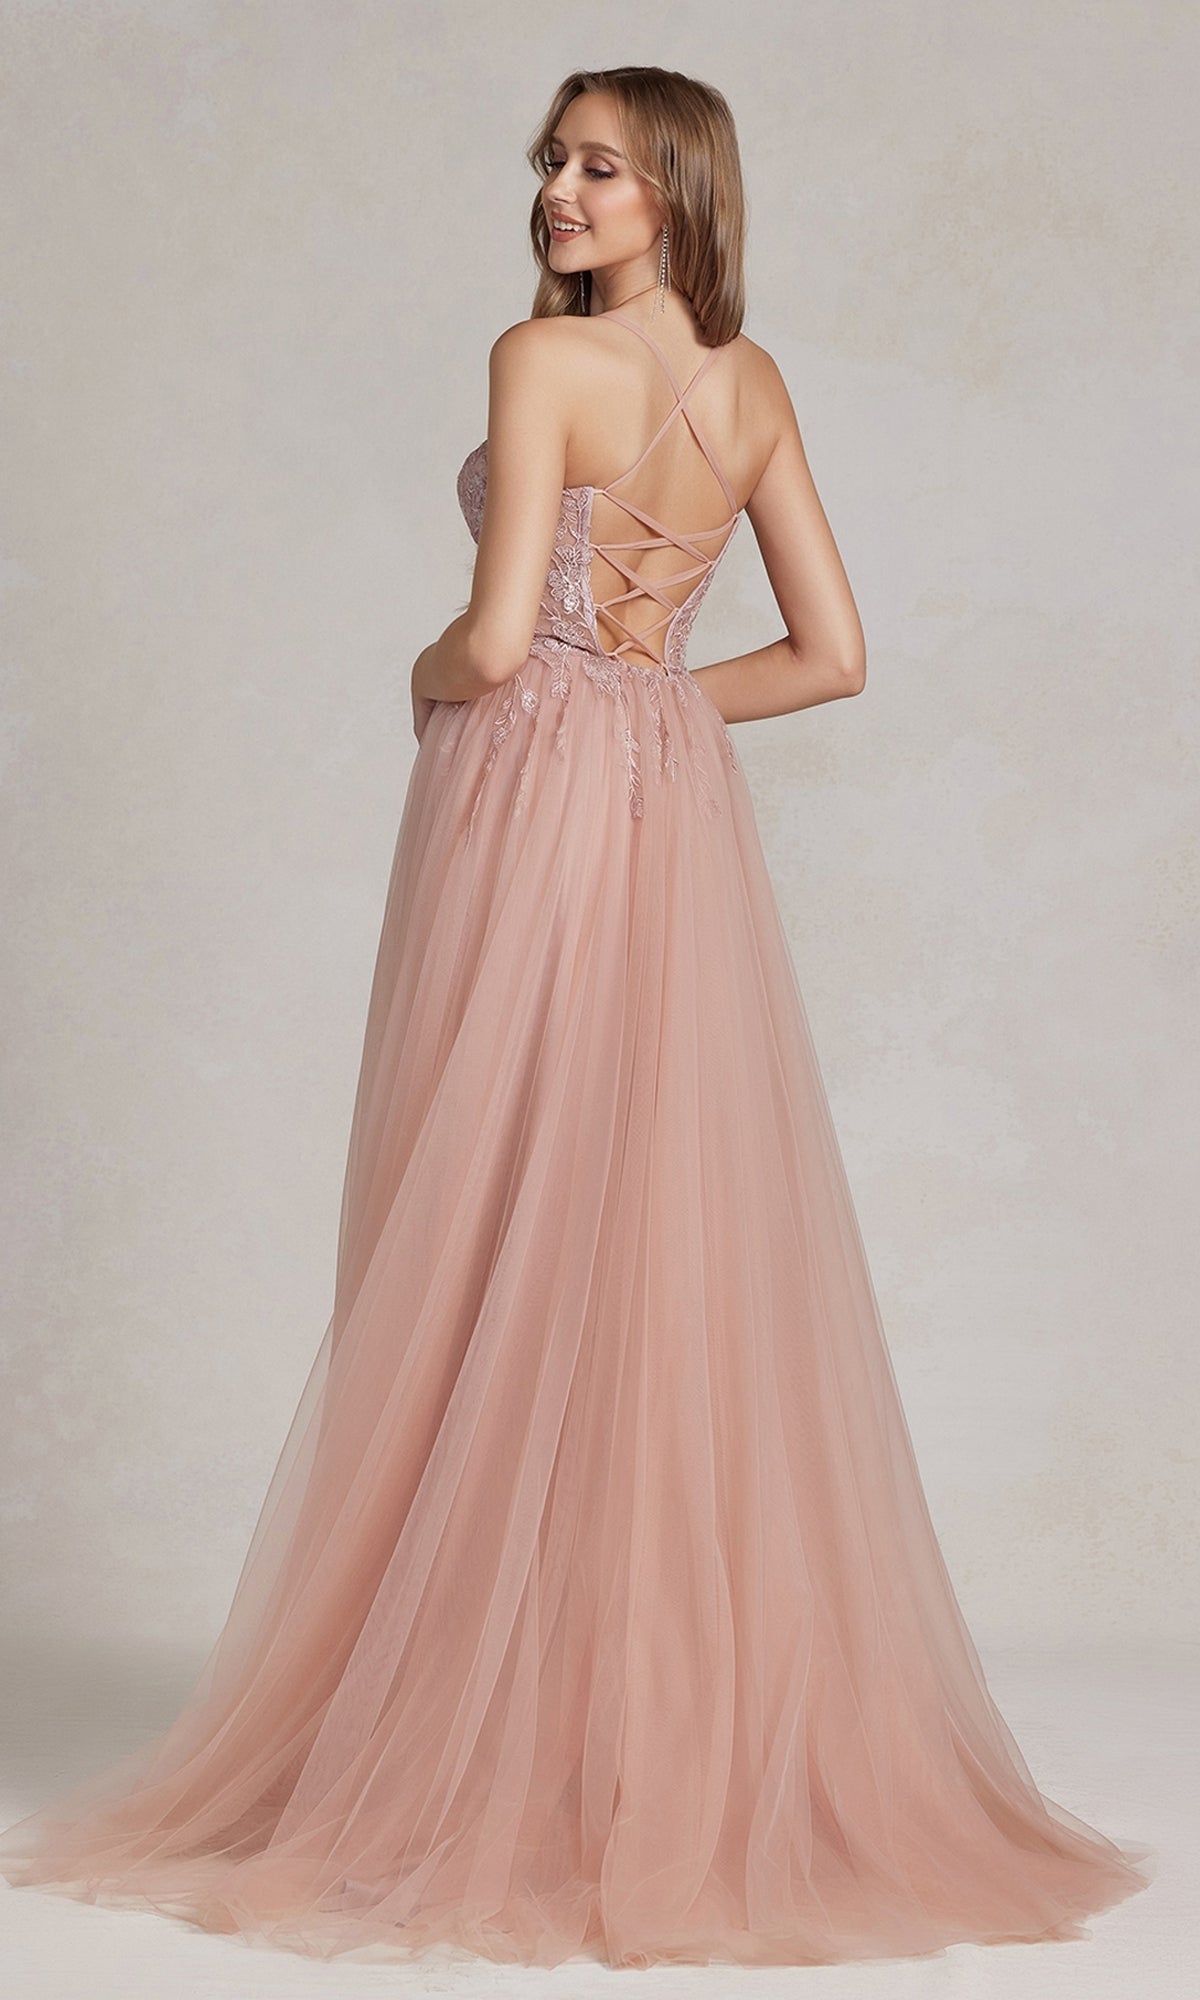 Sheer-Waist Long A-Line Prom Dress with Lace Corset